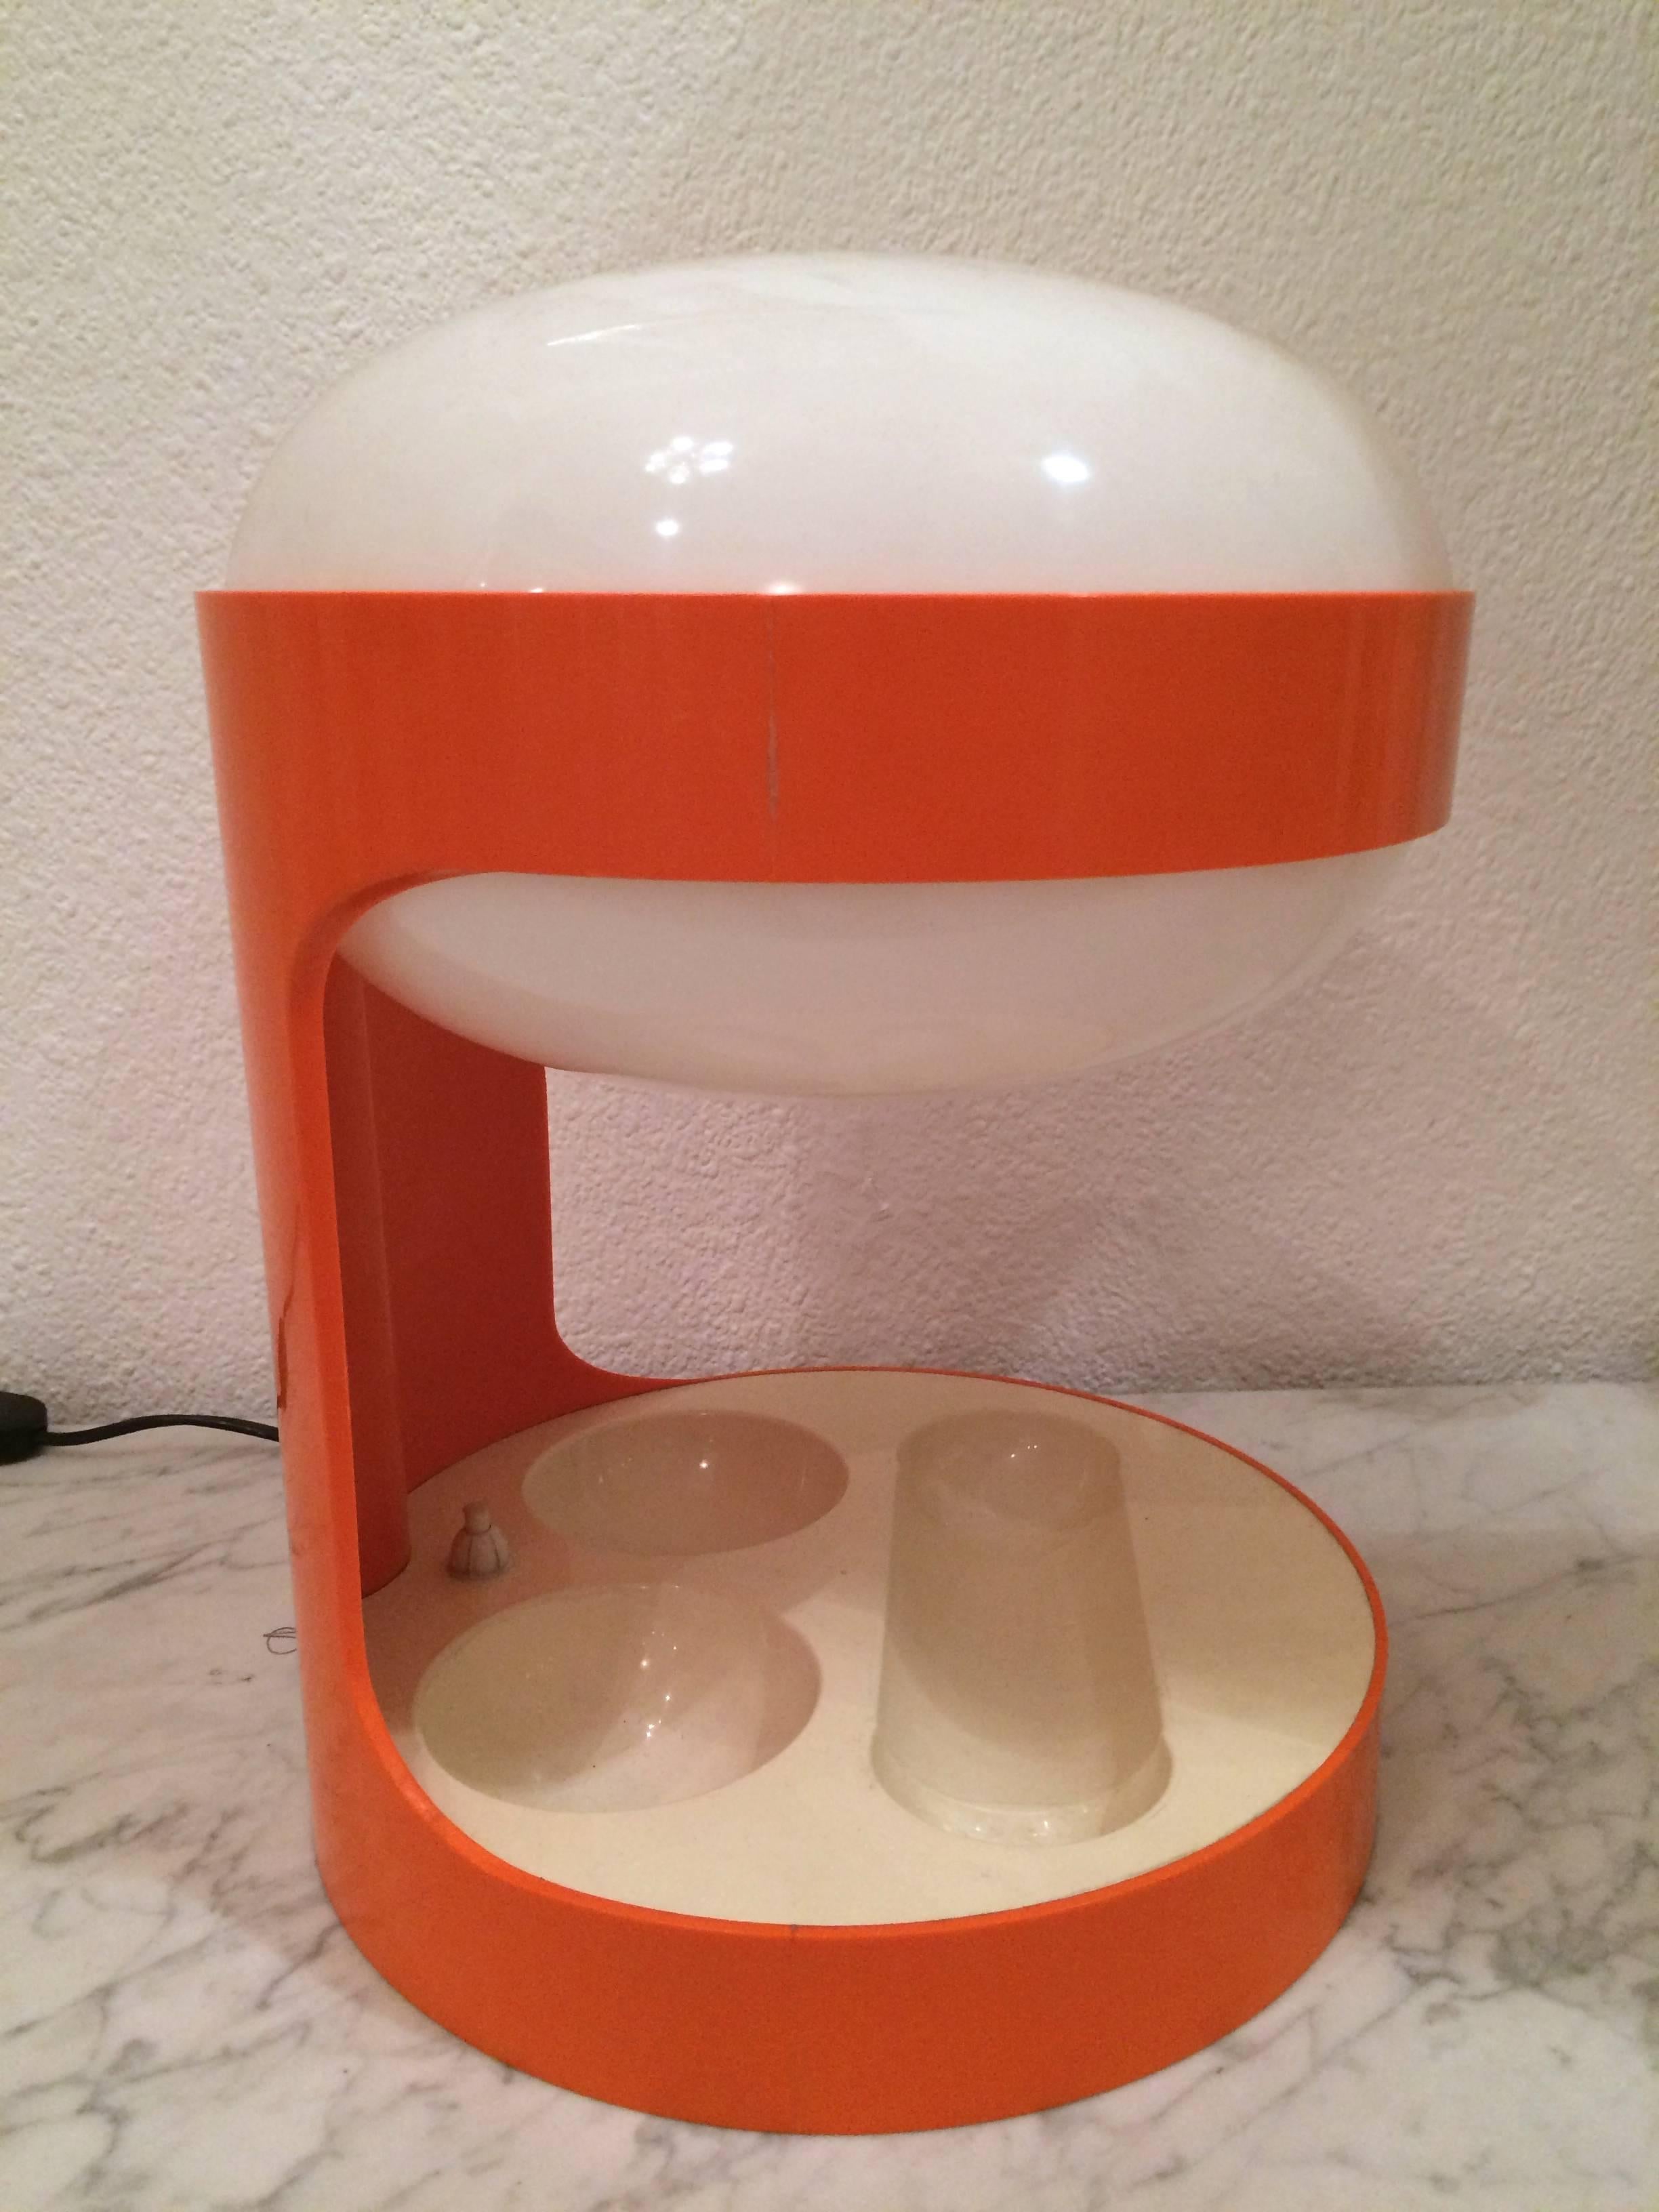 Joe Colombo KD29 orange table lamp produced by Kartell, circa 1968.
Perfect condition.
Same lamp in white available.